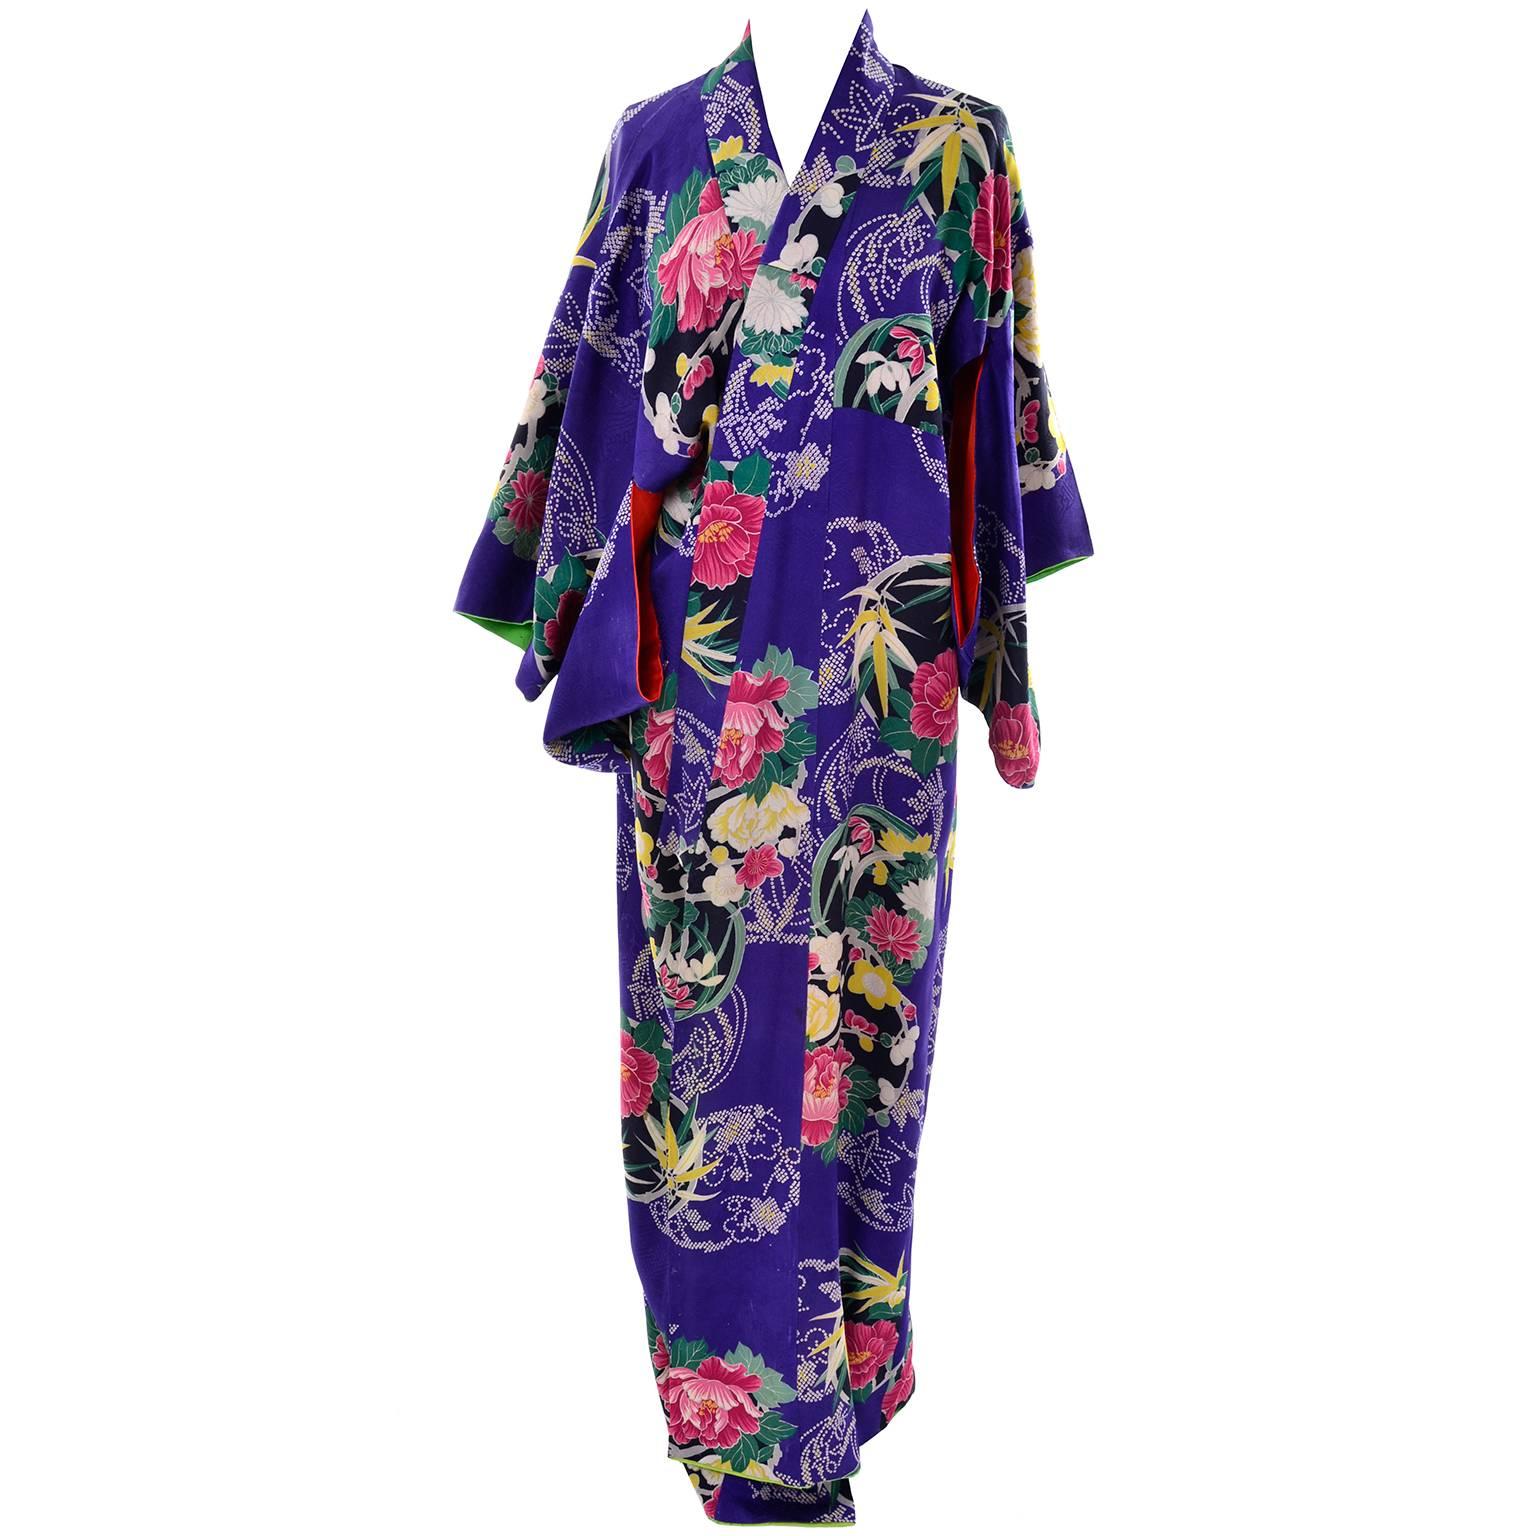 This beautiful royal blue floral silk kimono is from an estate of Asian textiles and clothing we acquired a while back. This kimono has wonderful flowers and leaves in the silk print and really gorgeous silk lining. The robe measures 58